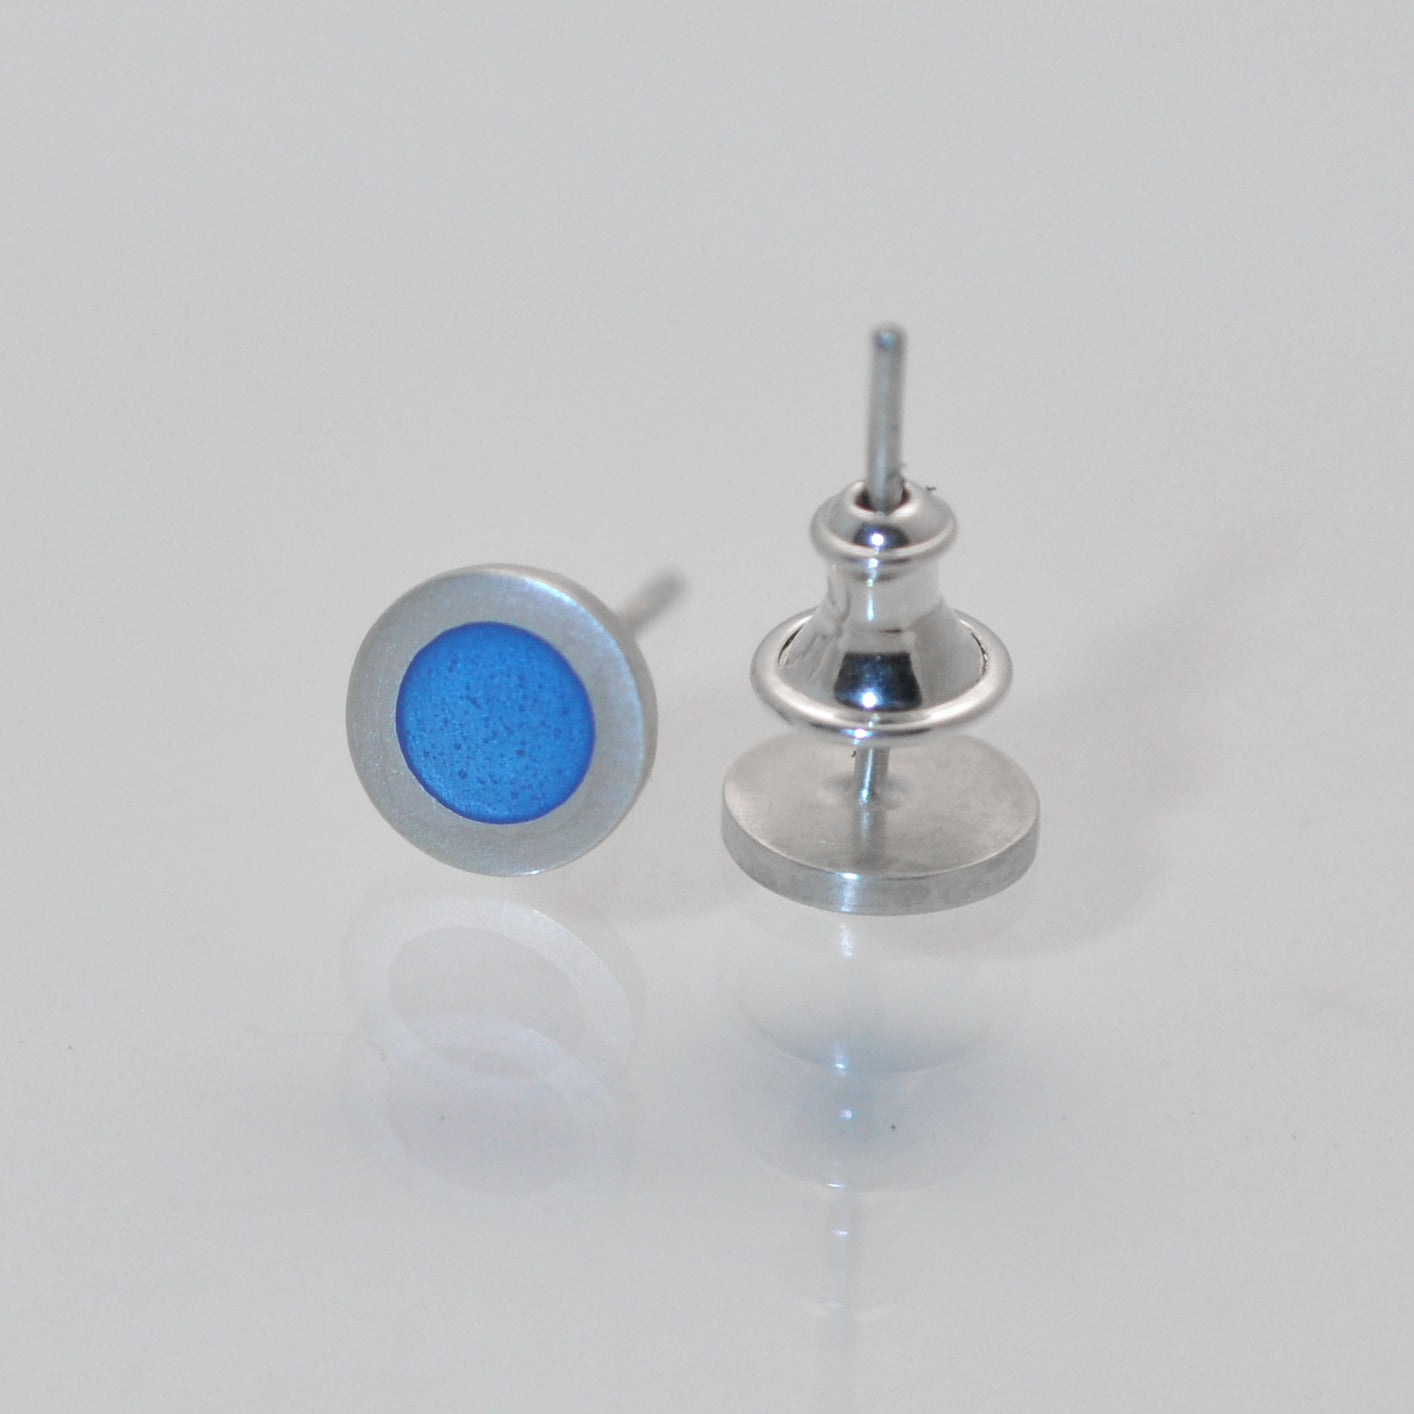 Small round silver flat earstuds, light blue